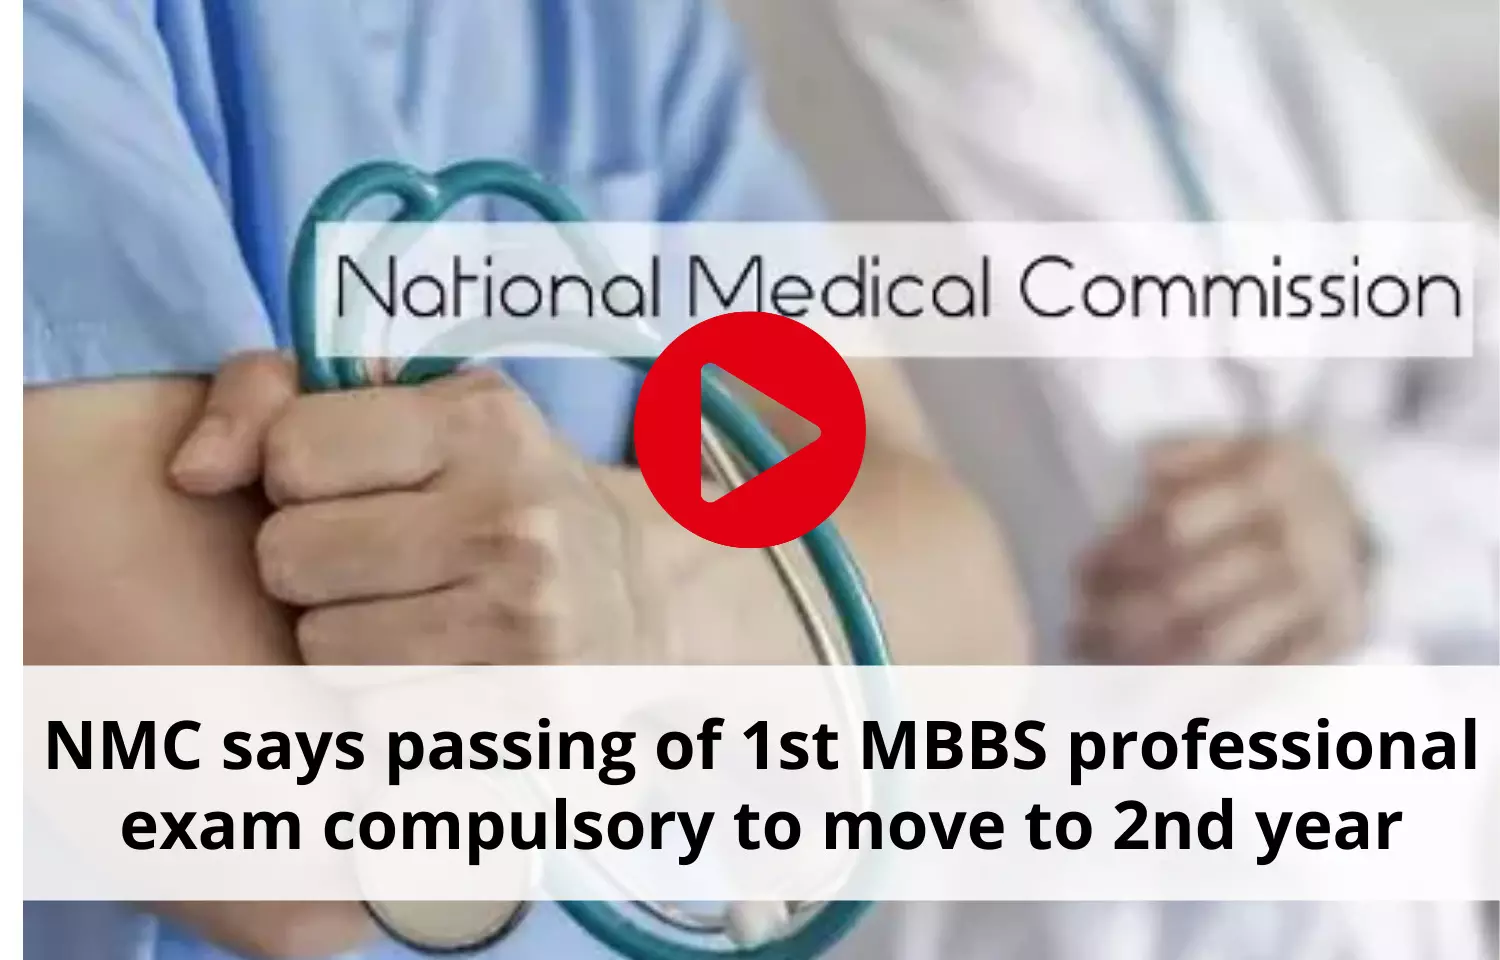 NMC says passing of 1st MBBS professional exam compulsory to move to 2nd year